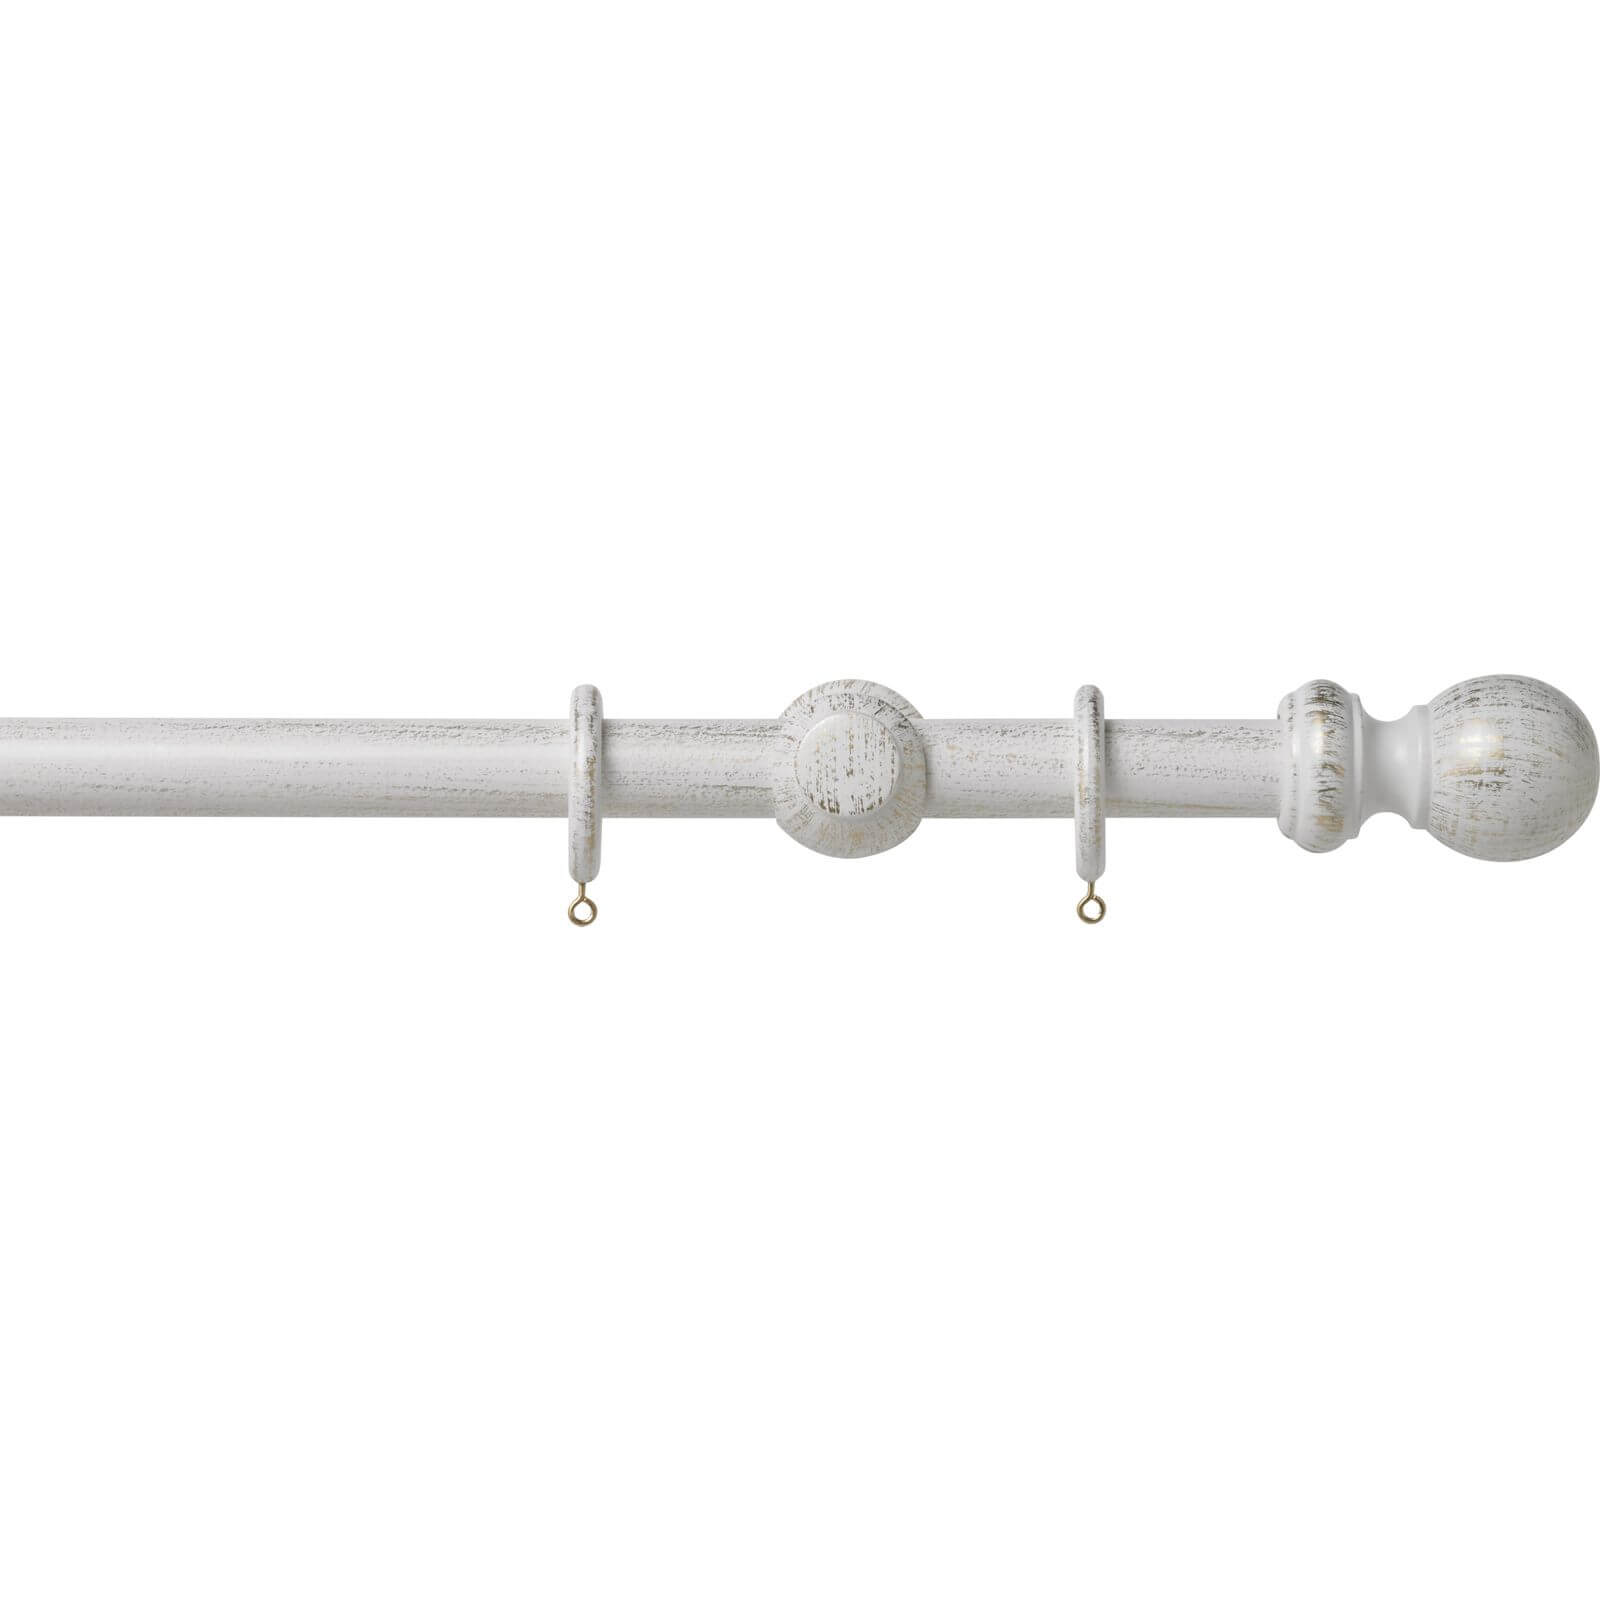 Photo of Scratched White Wood 28mm Curtain Pole With Ball Finials - 1.8m